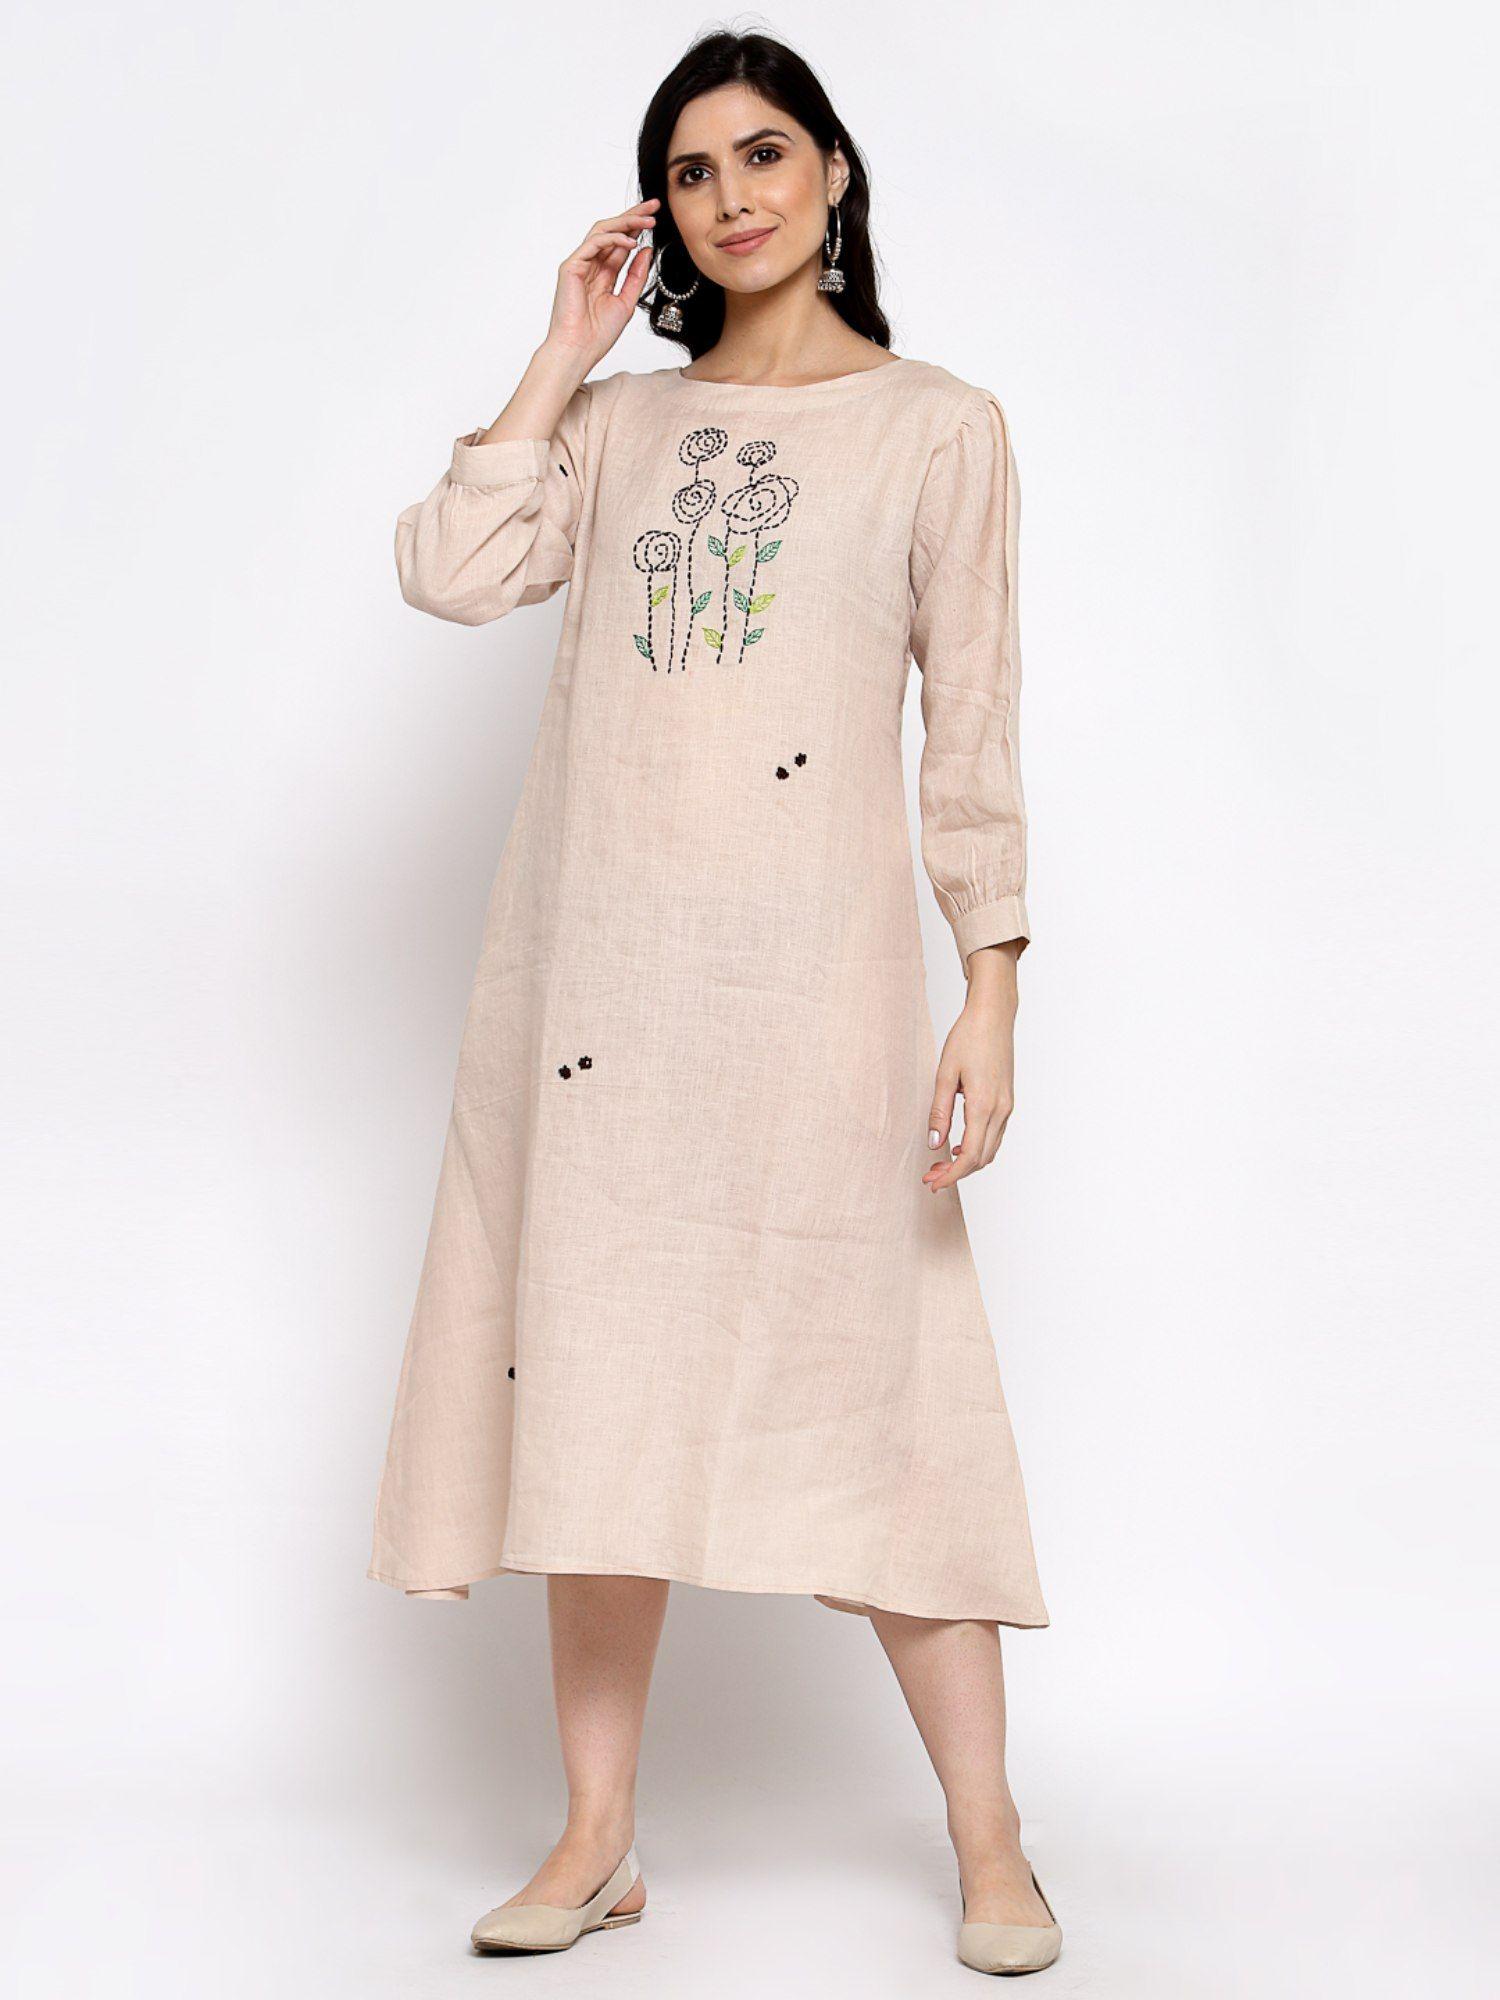 linen dress with hand embroidery on it -beige